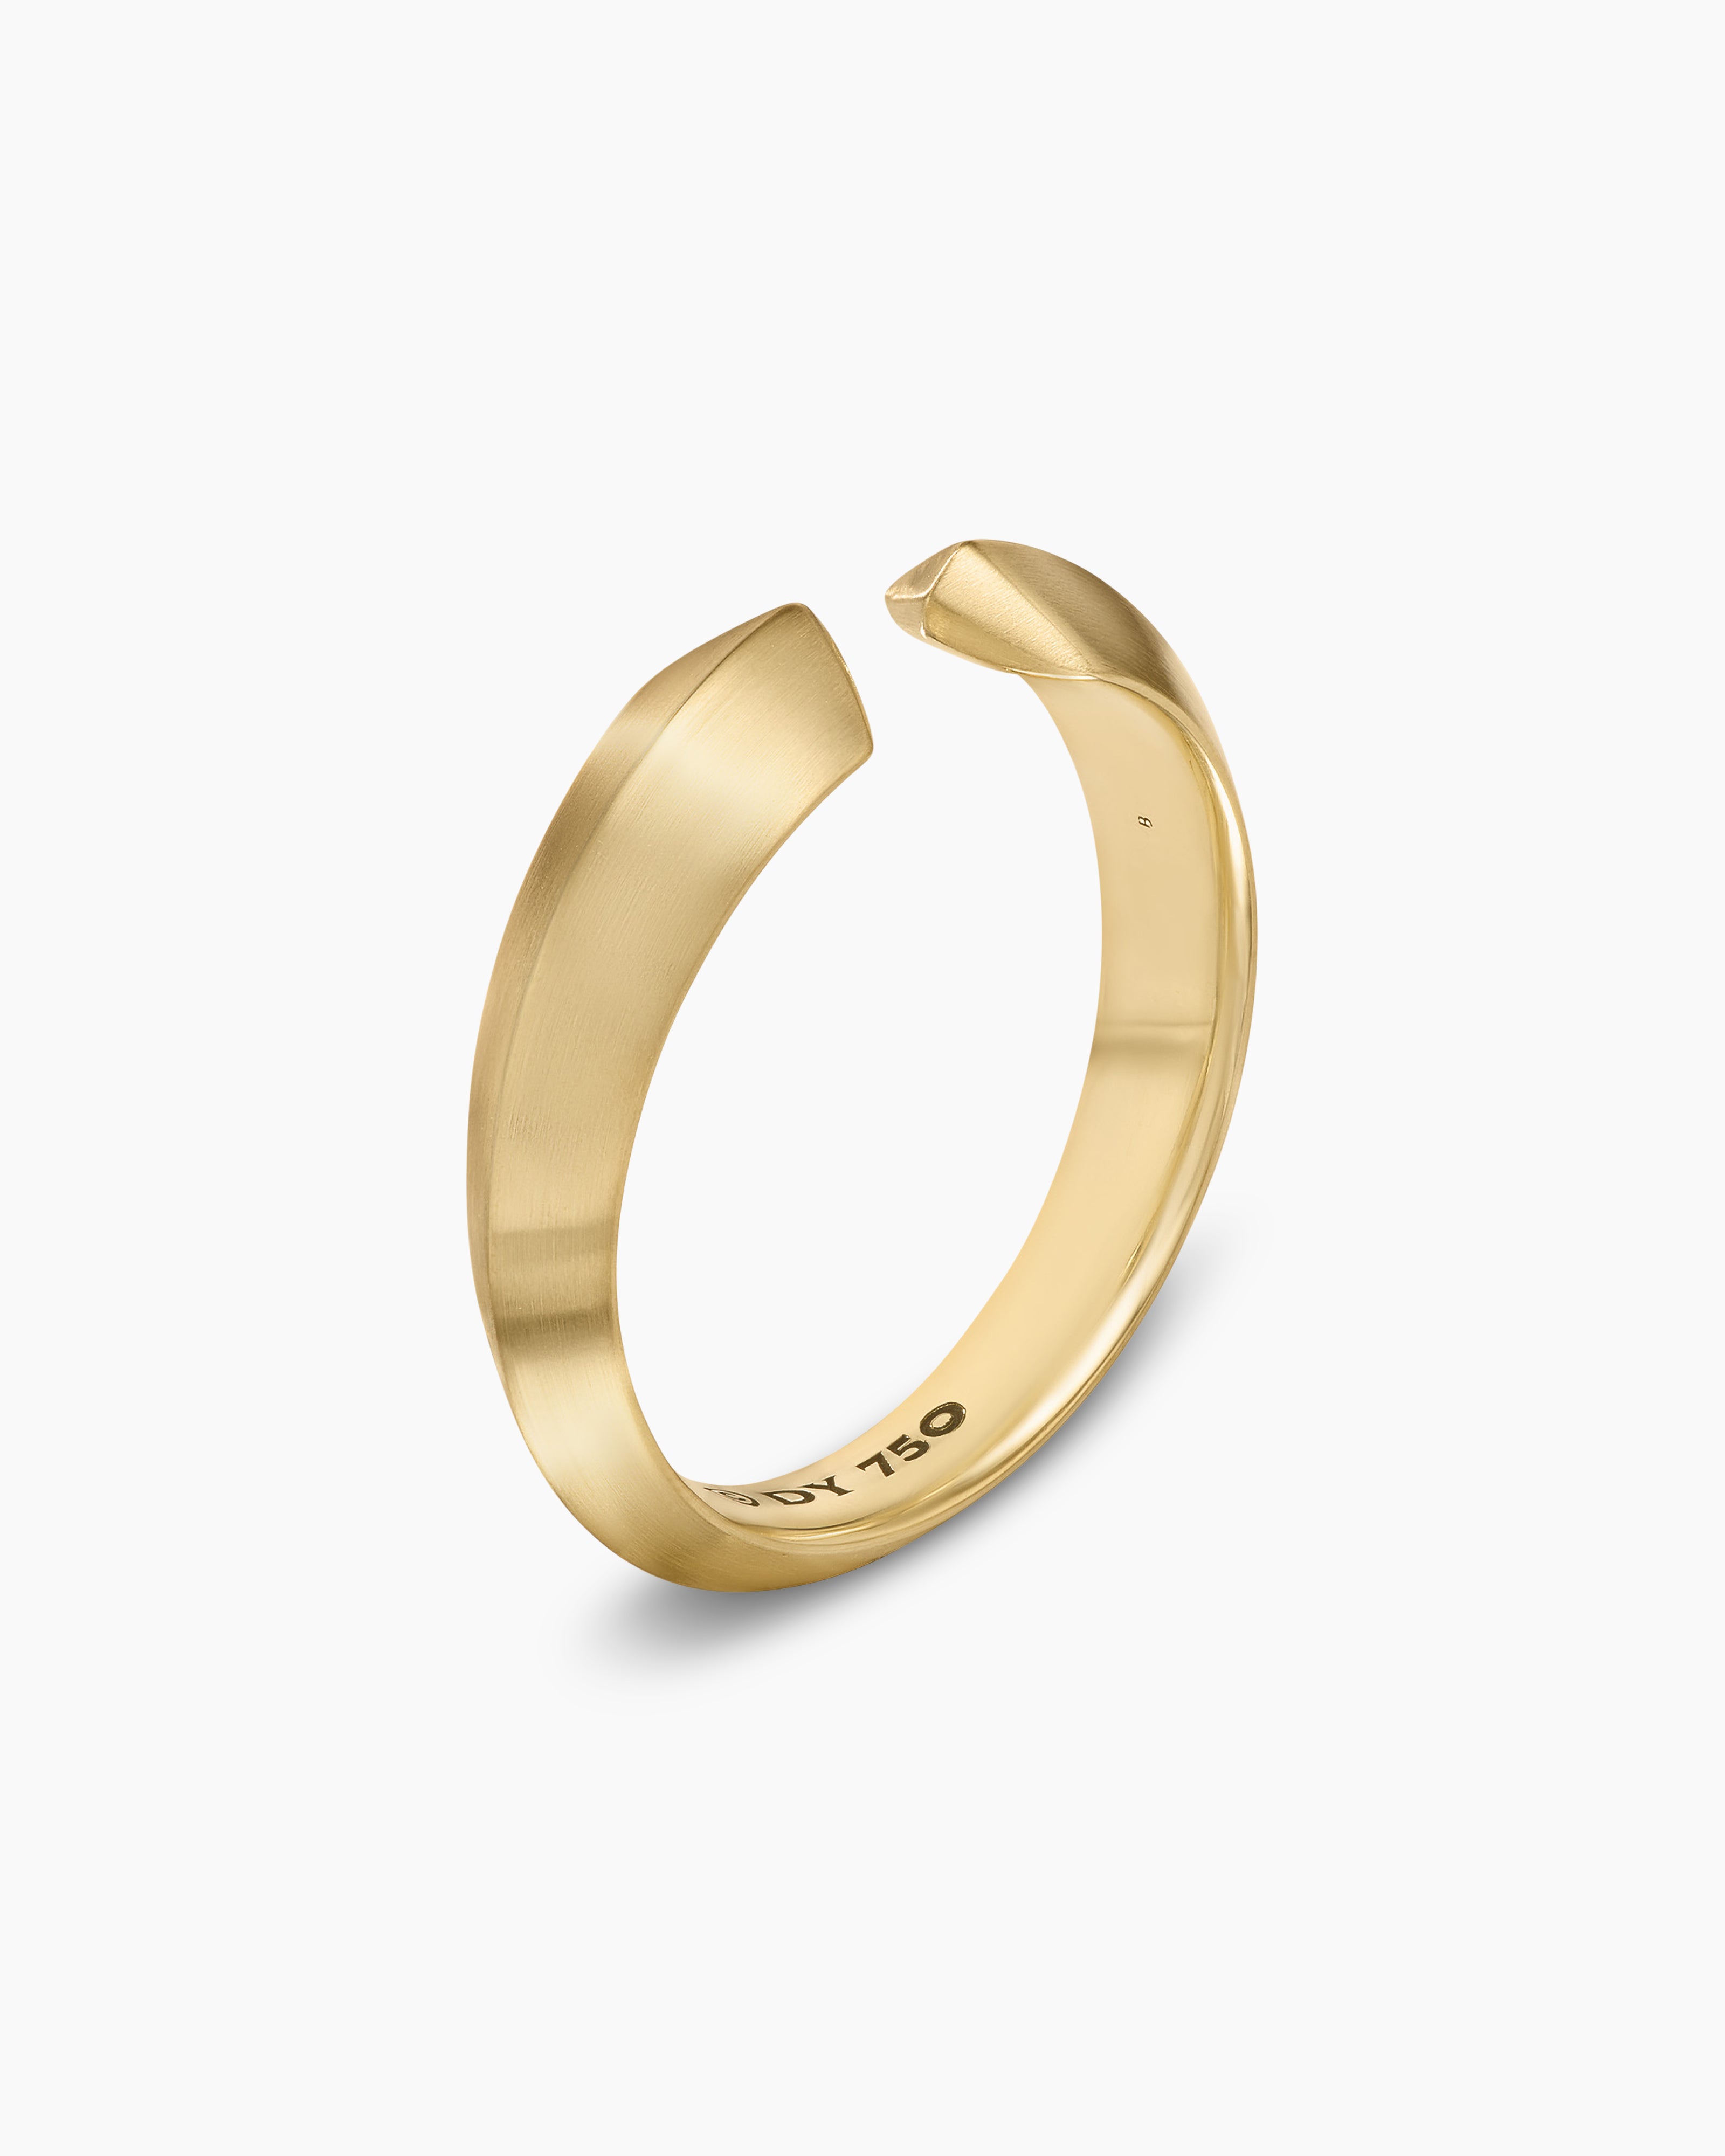 Roman Numerals Date Ring in LDS Inspirational Rings on LDSBookstore.com